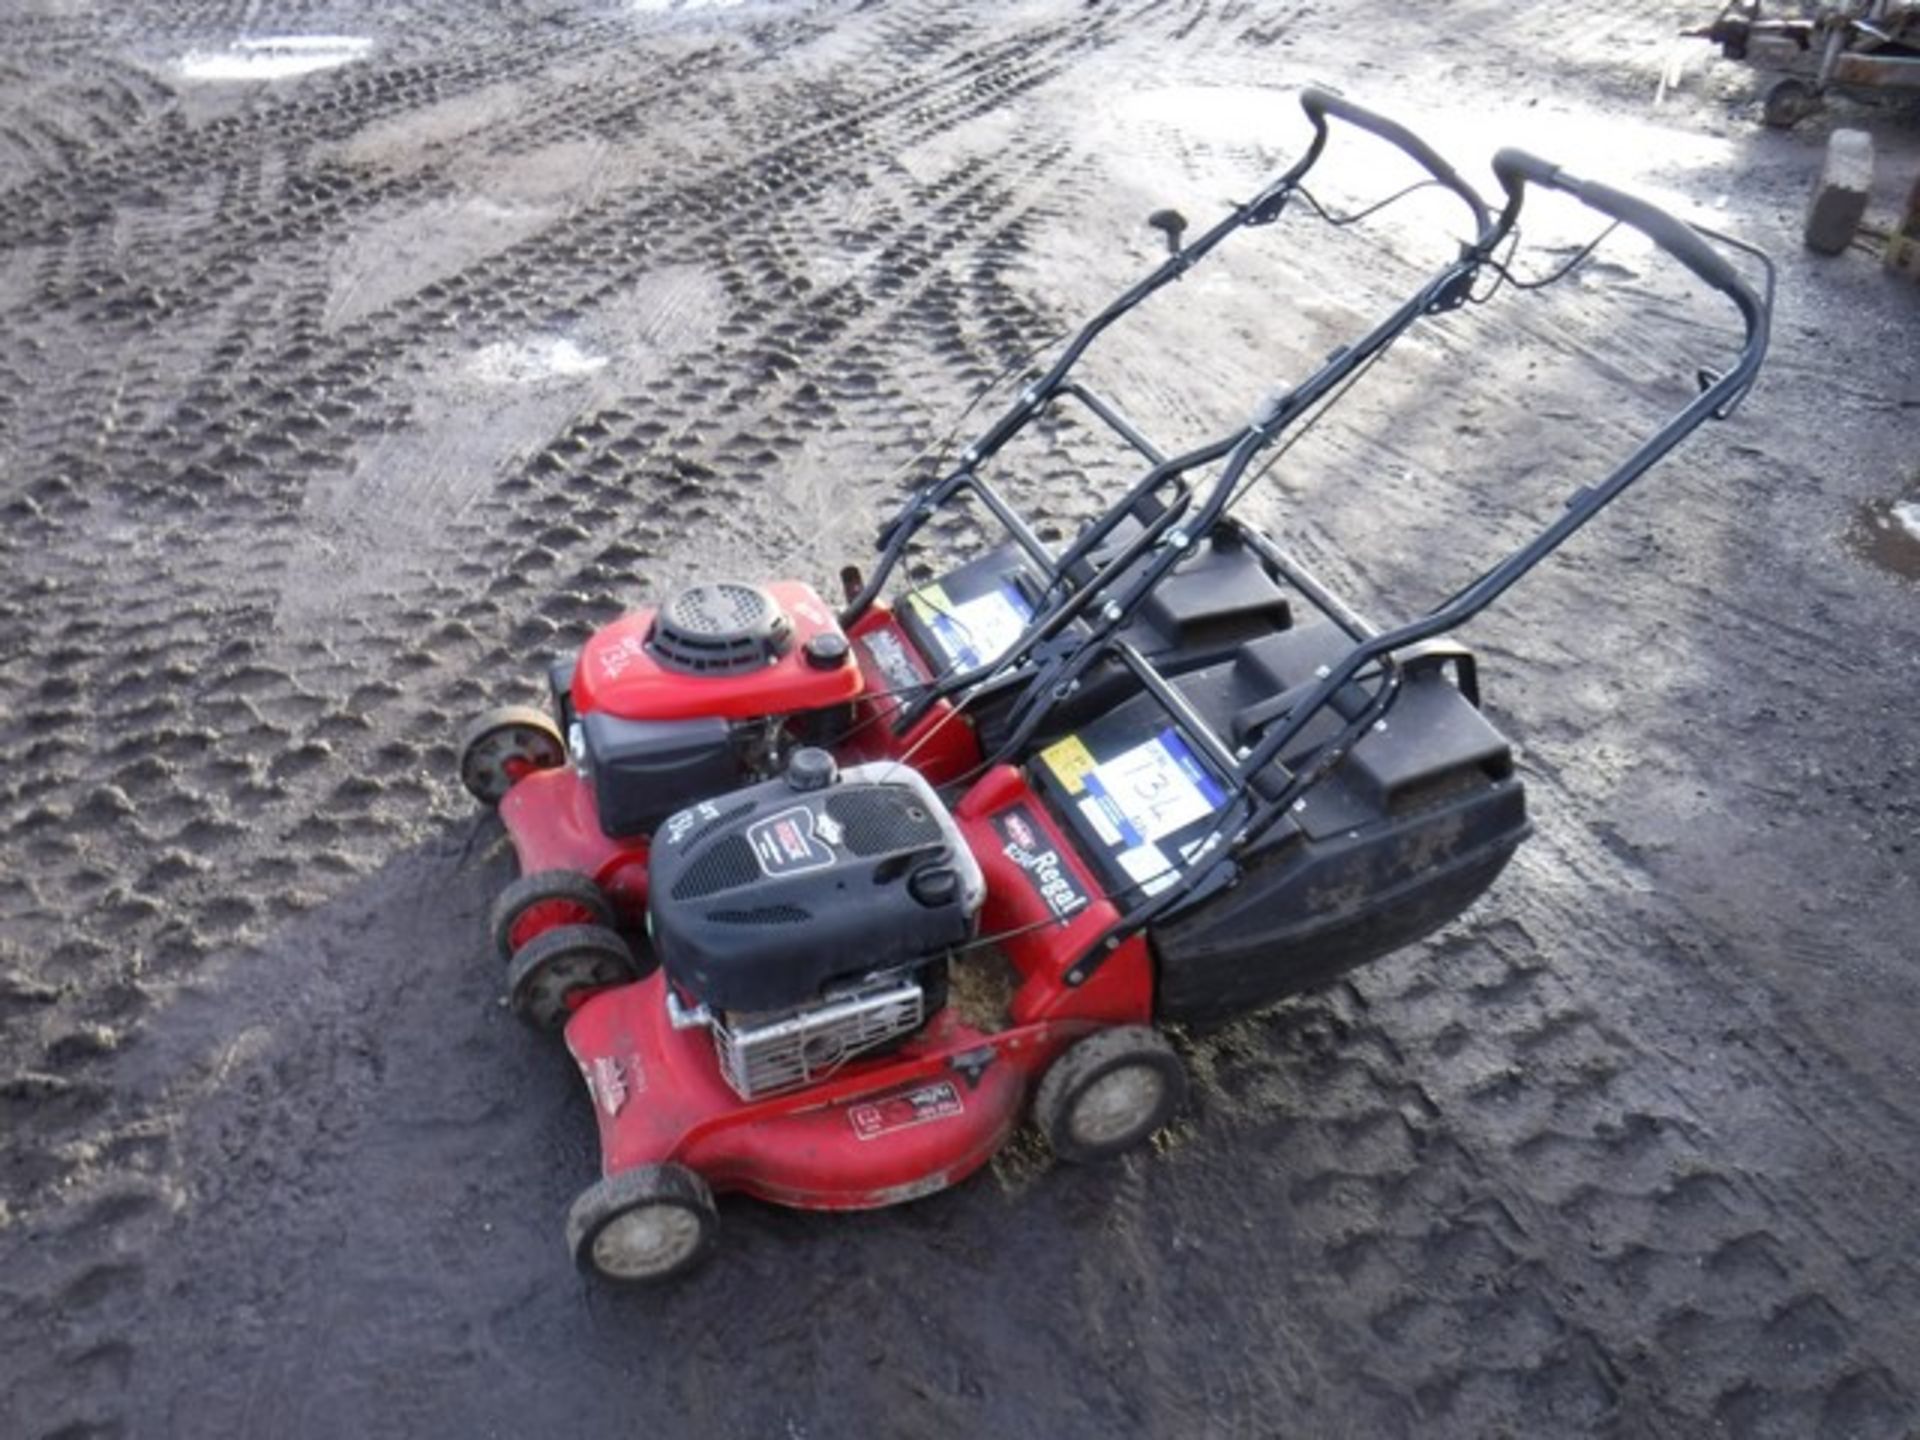 2 x ROVER REGAL mowers c/w back boxes